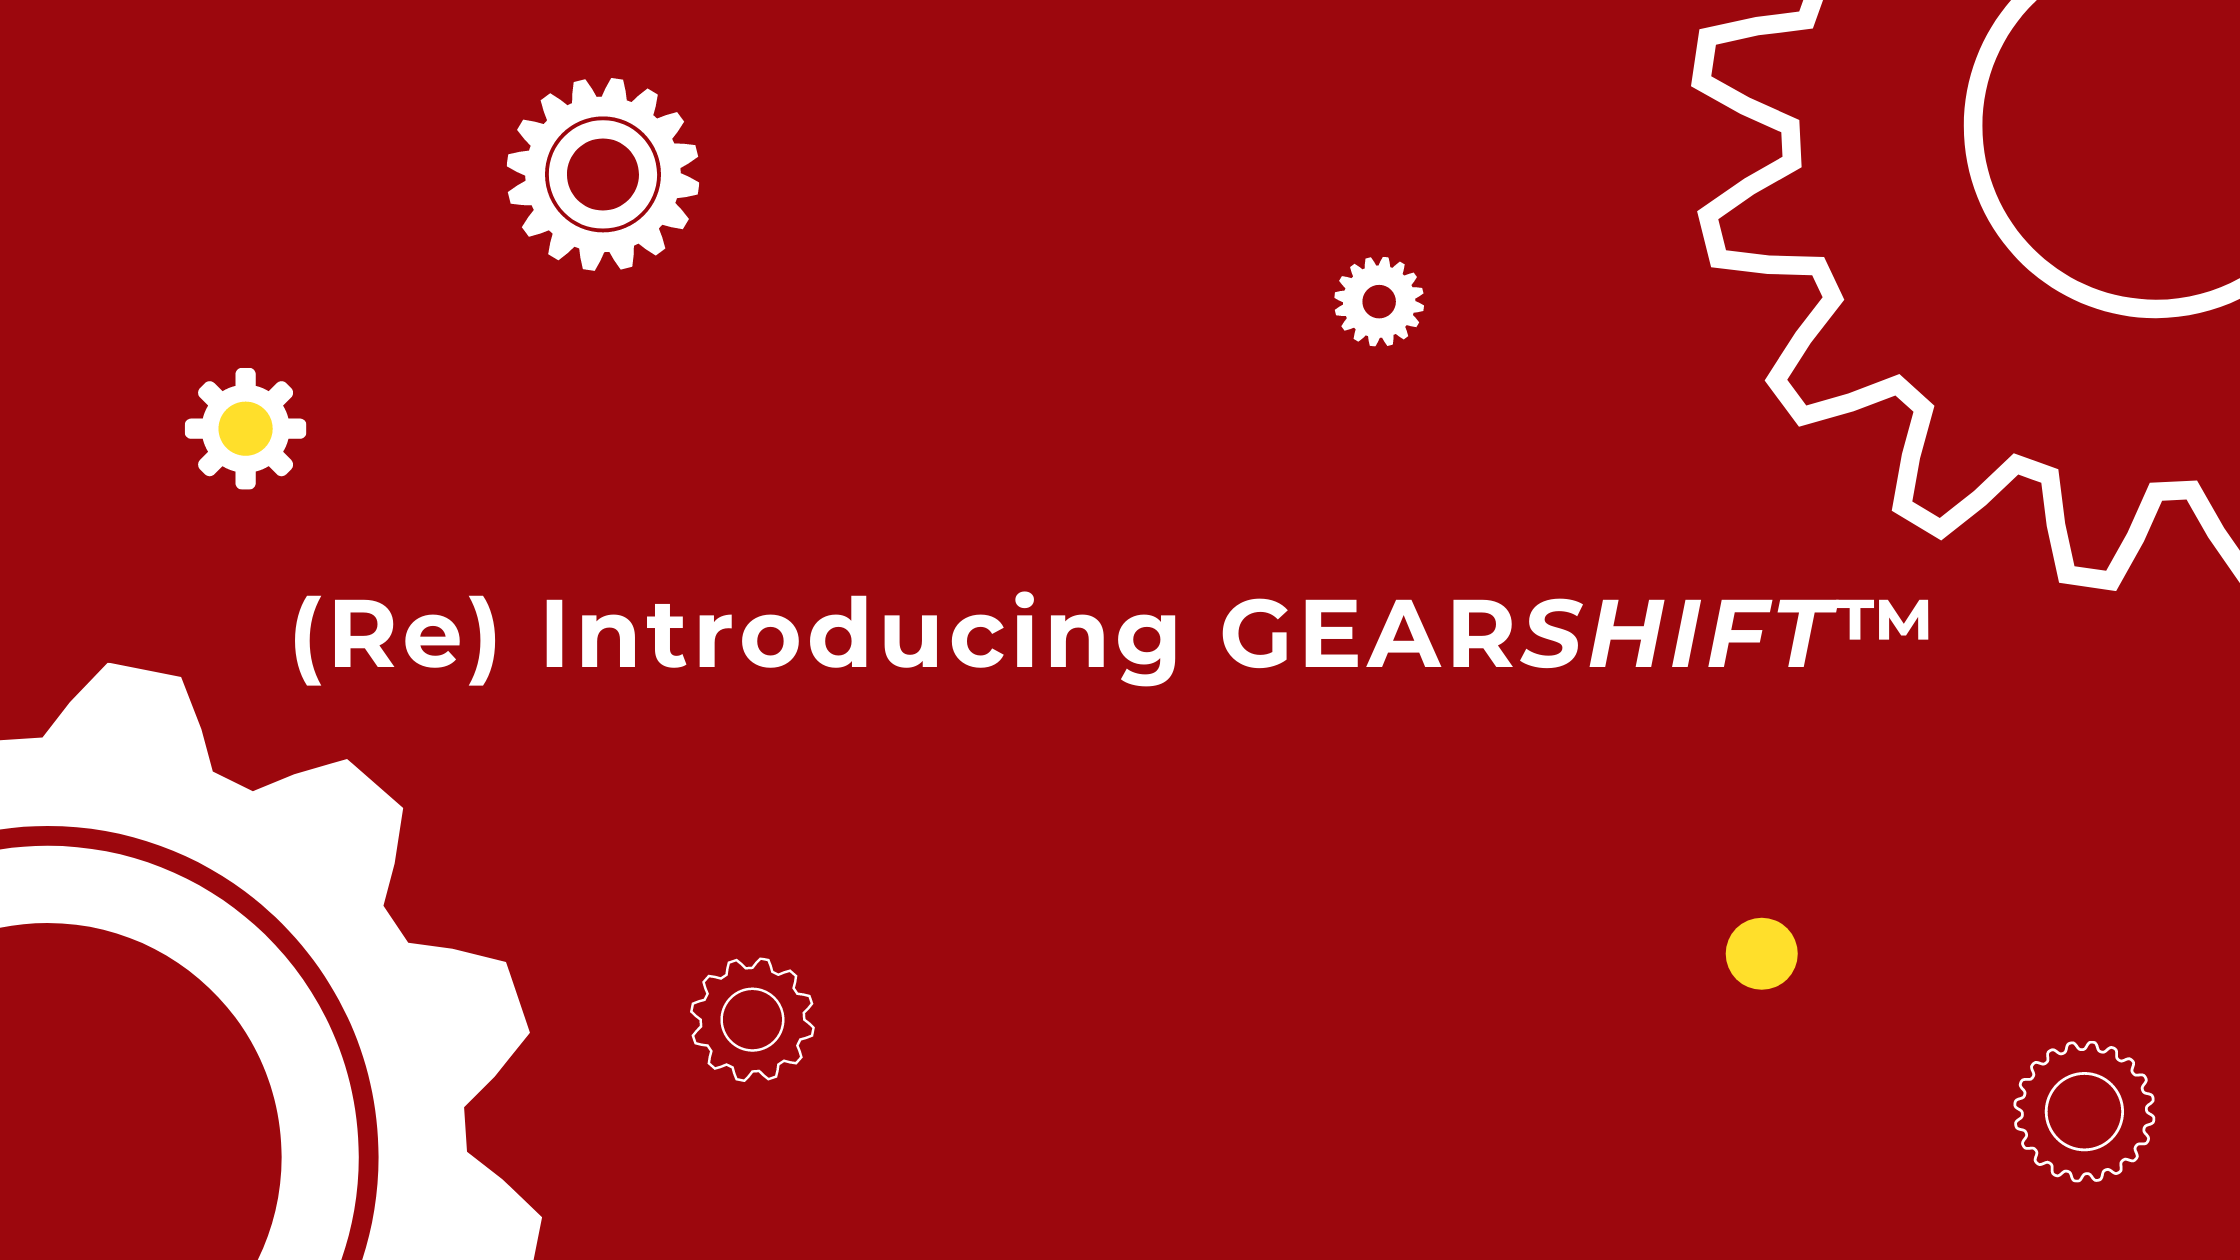 (Re) Introducing GEARSHIFT™